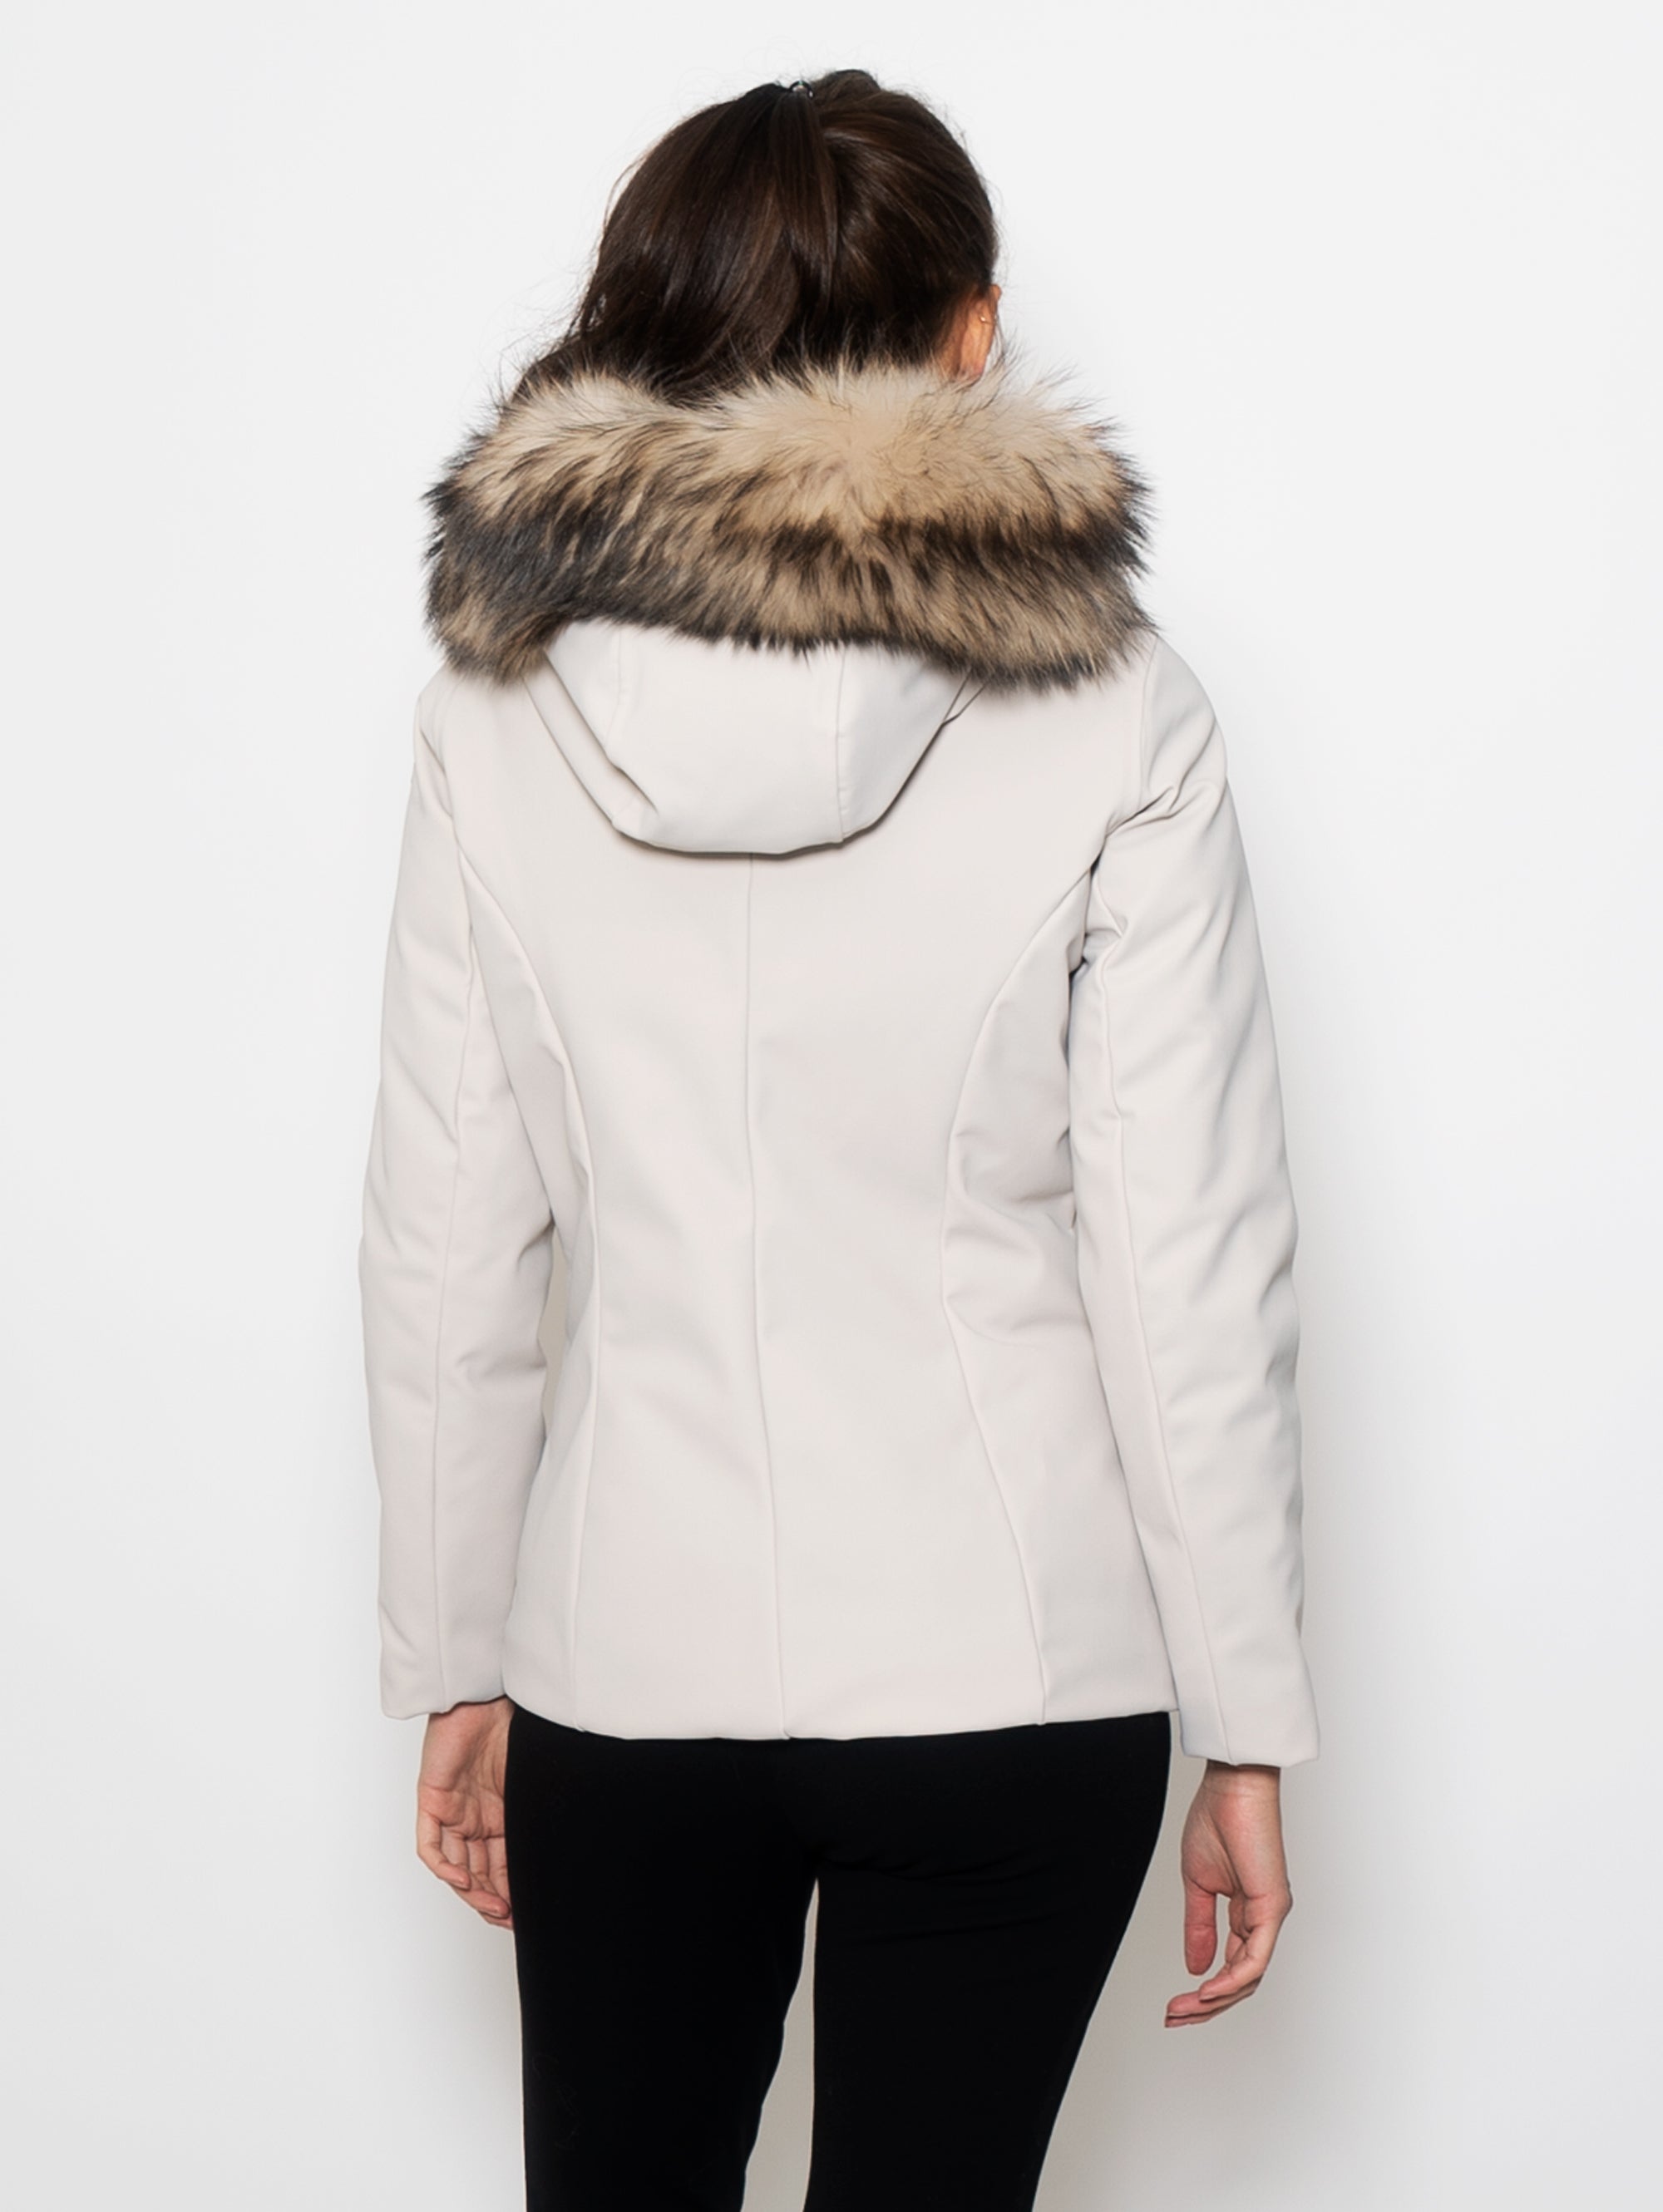 Jacket with Hood Edged in Sand Fur